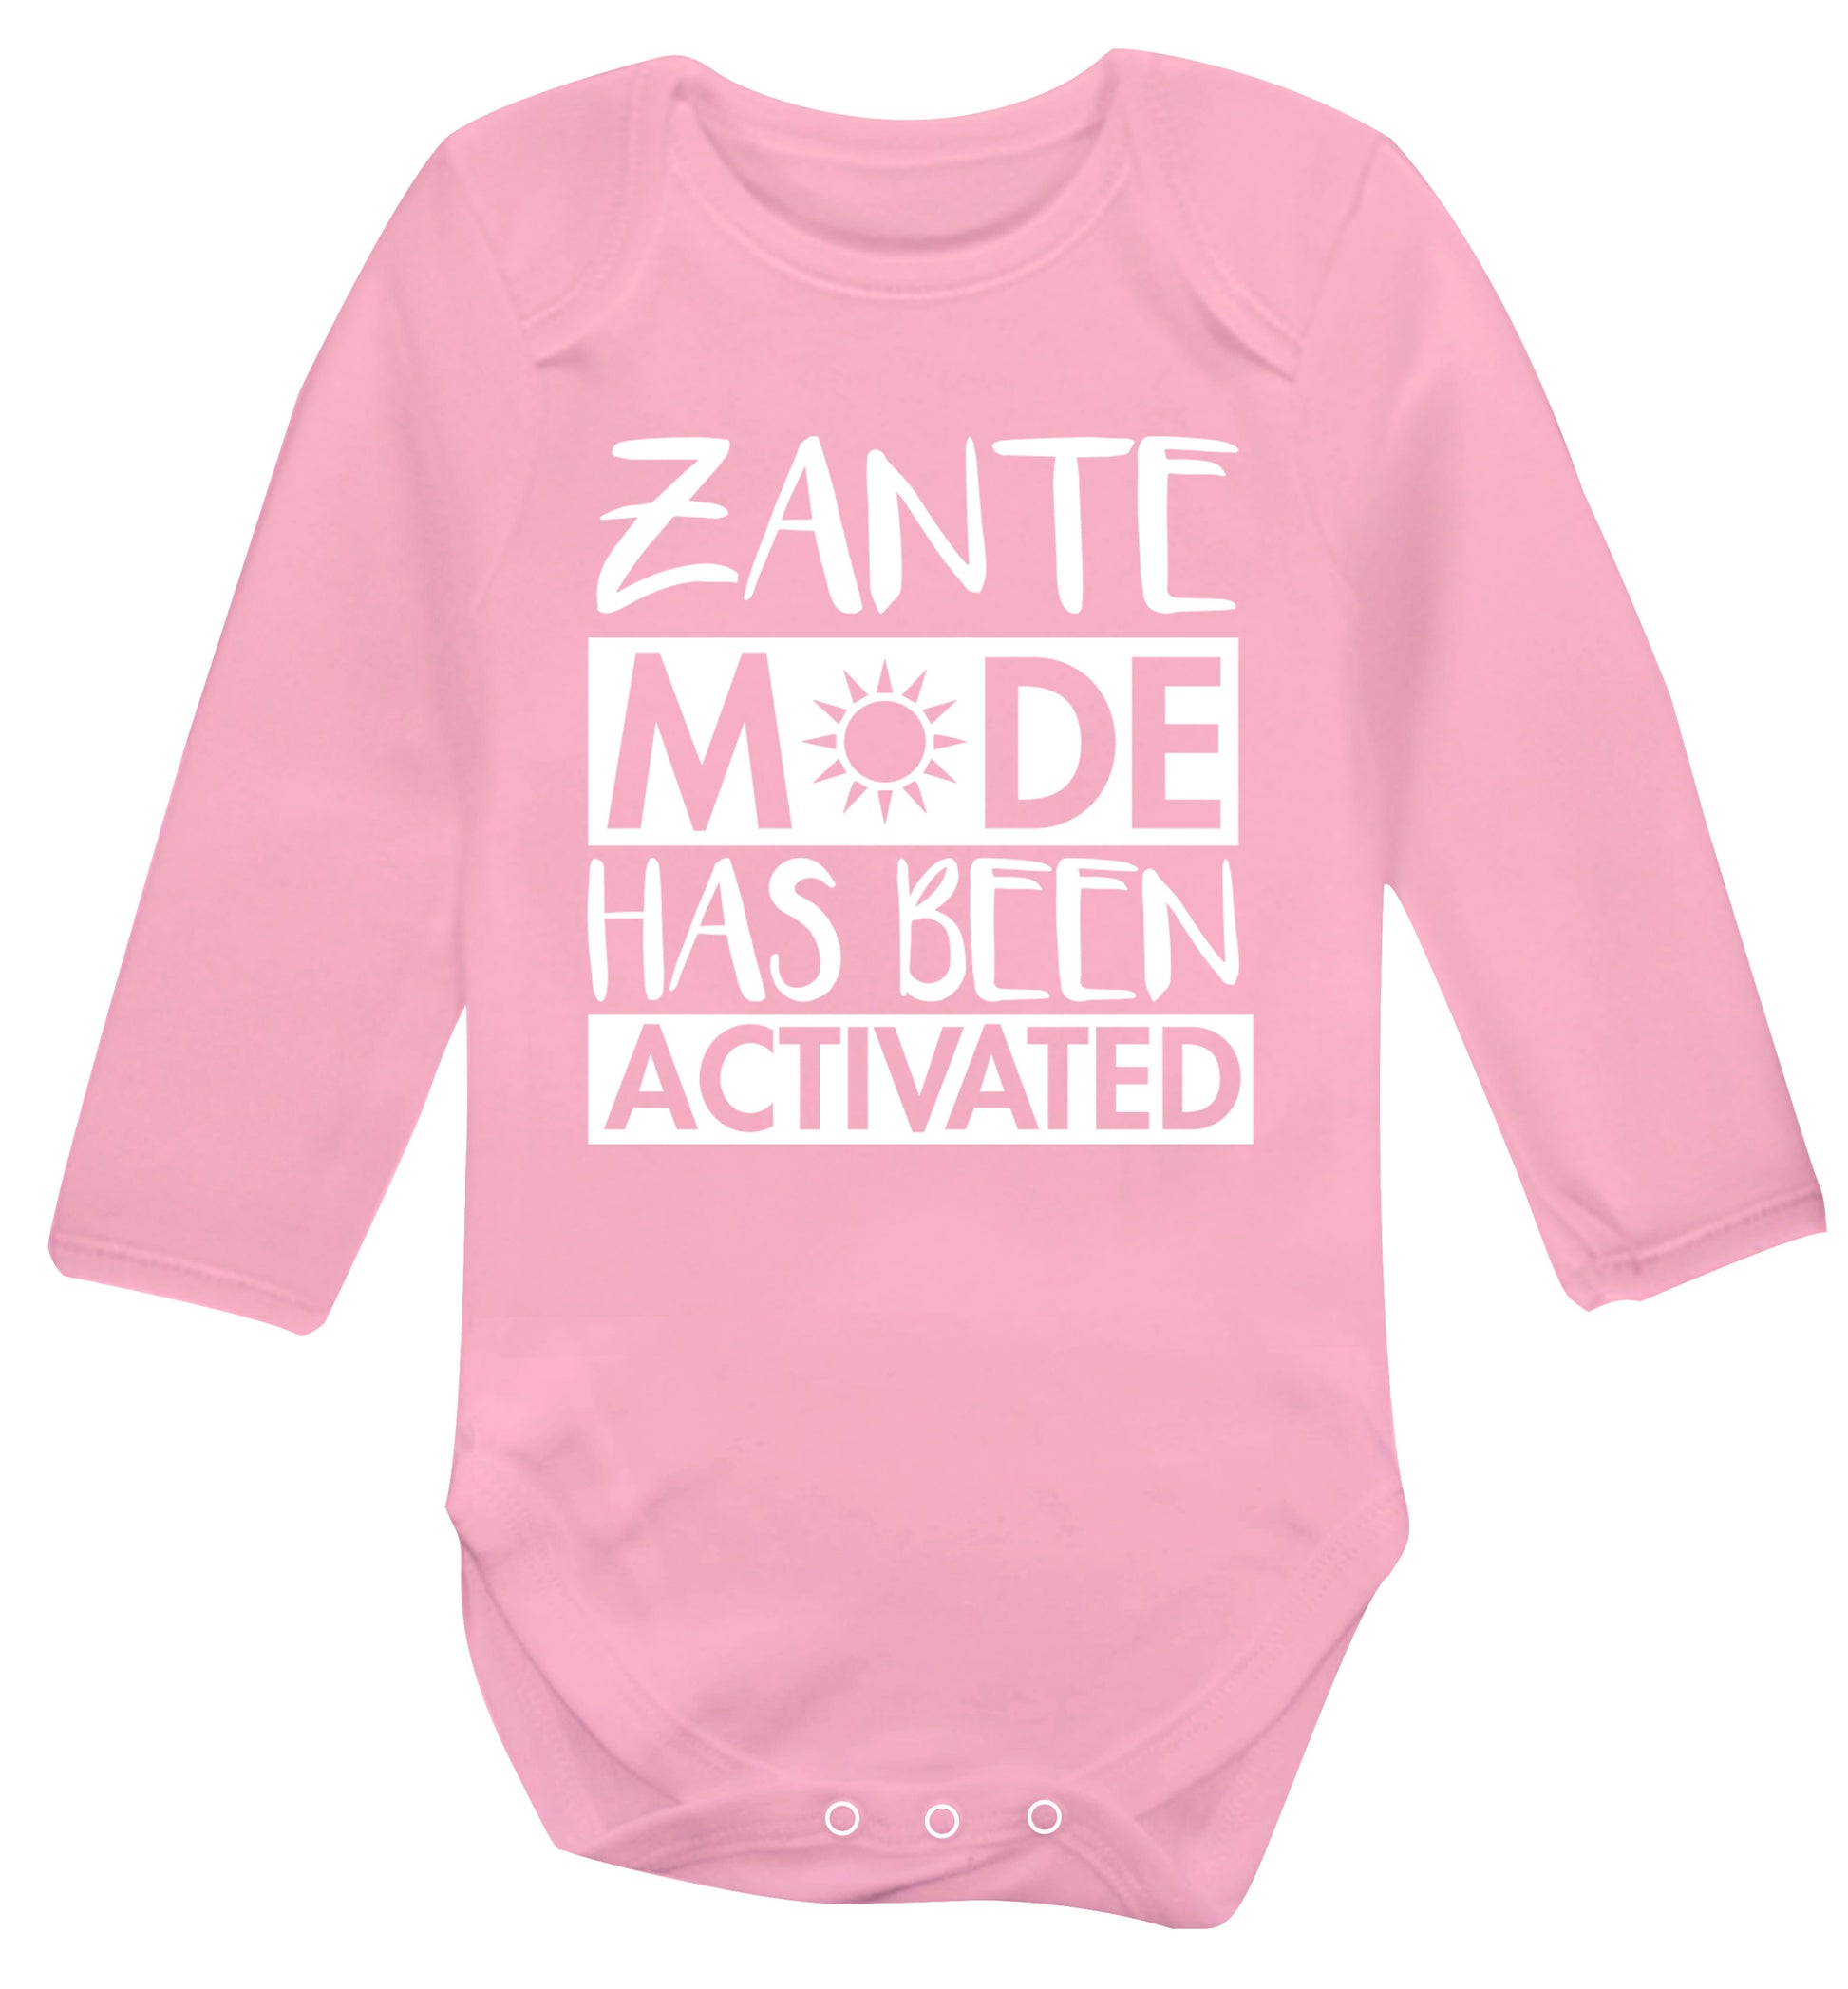 Zante mode has been activated Baby Vest long sleeved pale pink 6-12 months